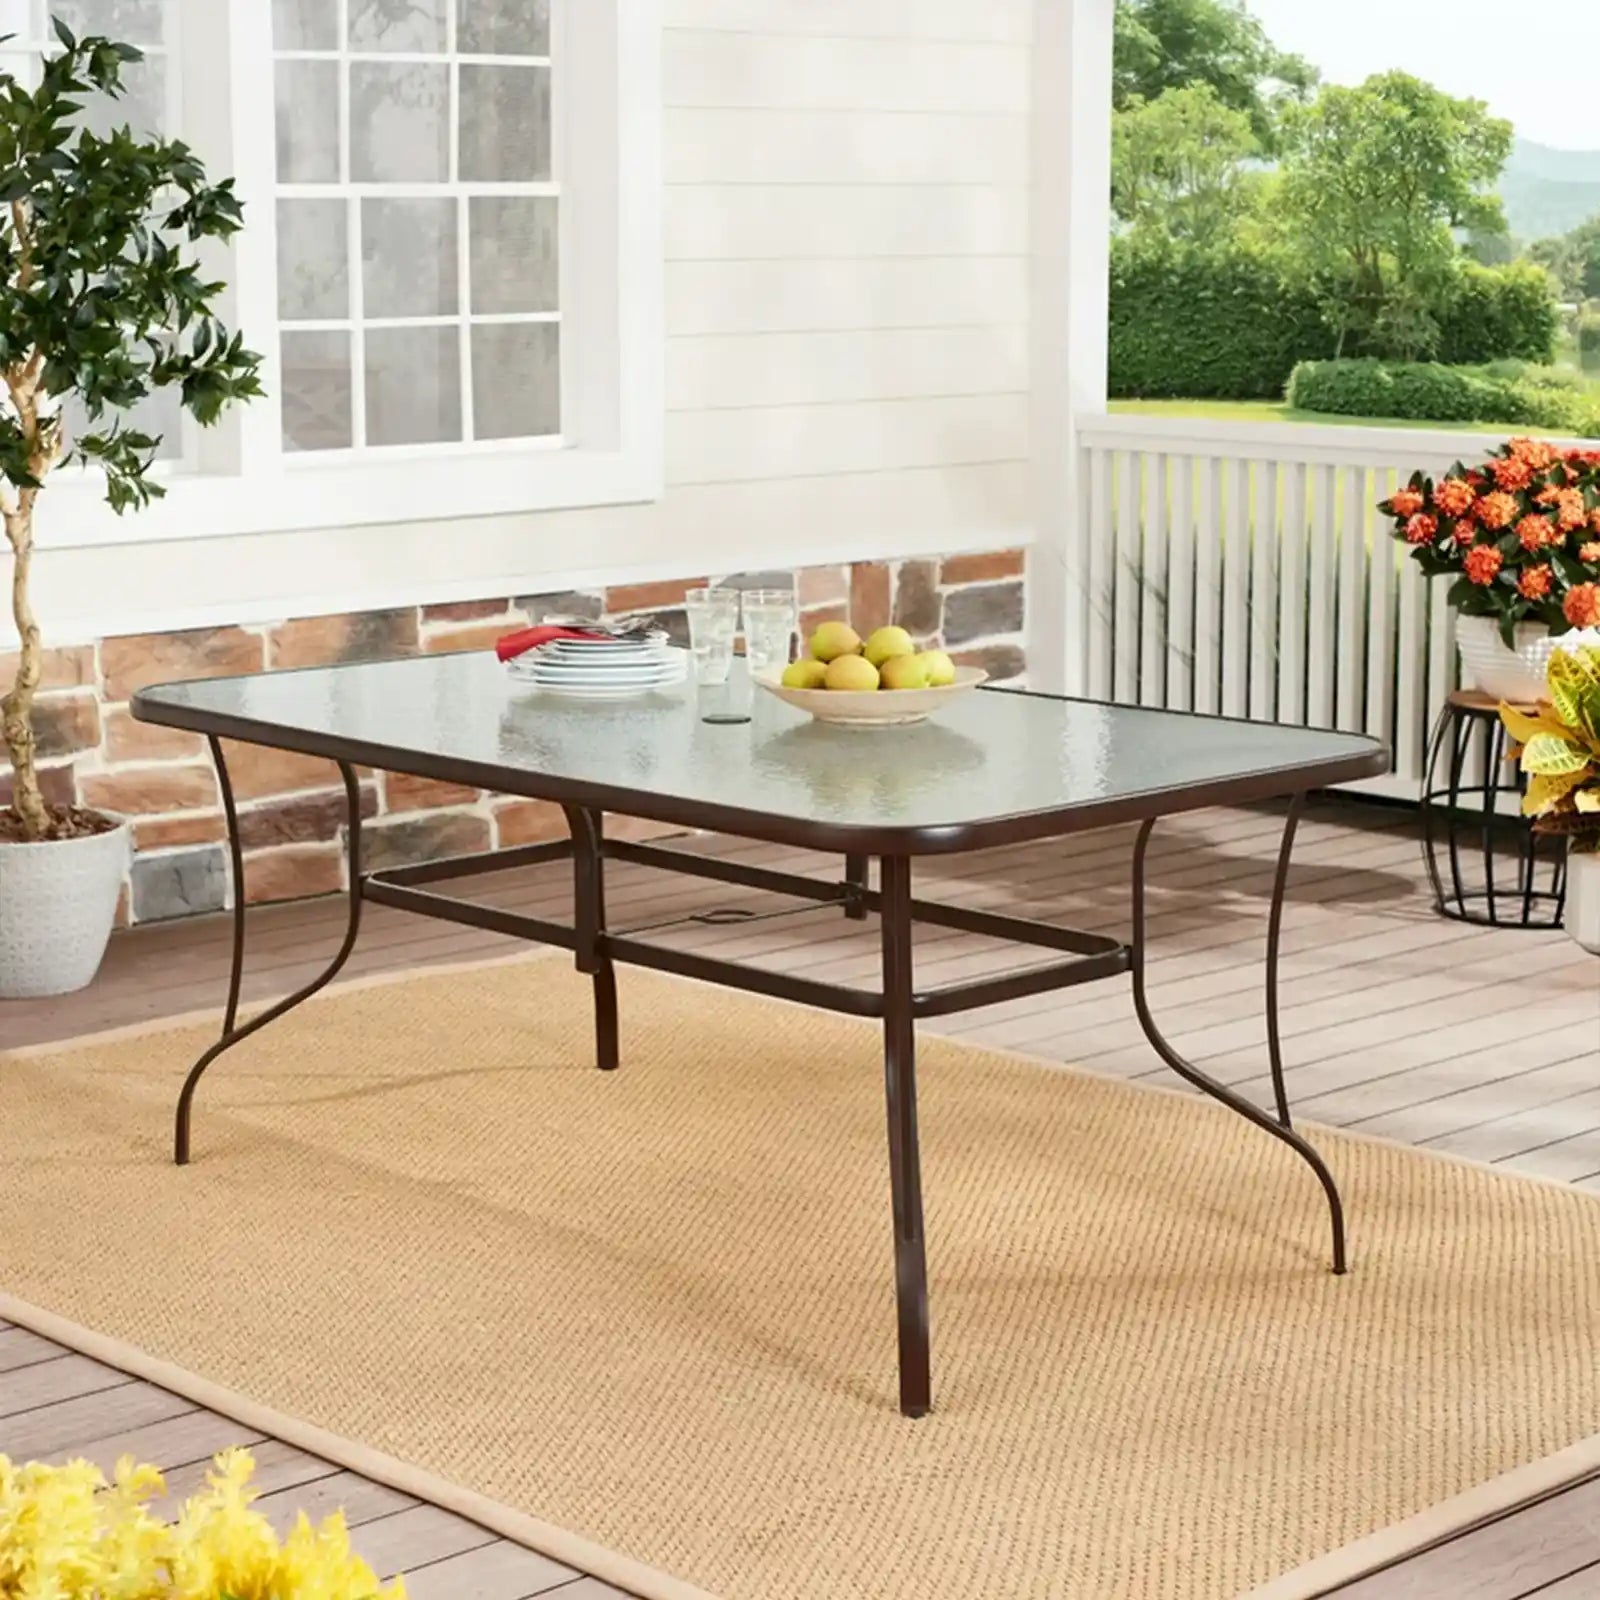 Premium Outdoor Patio Dining Set for Quality Lifestyle